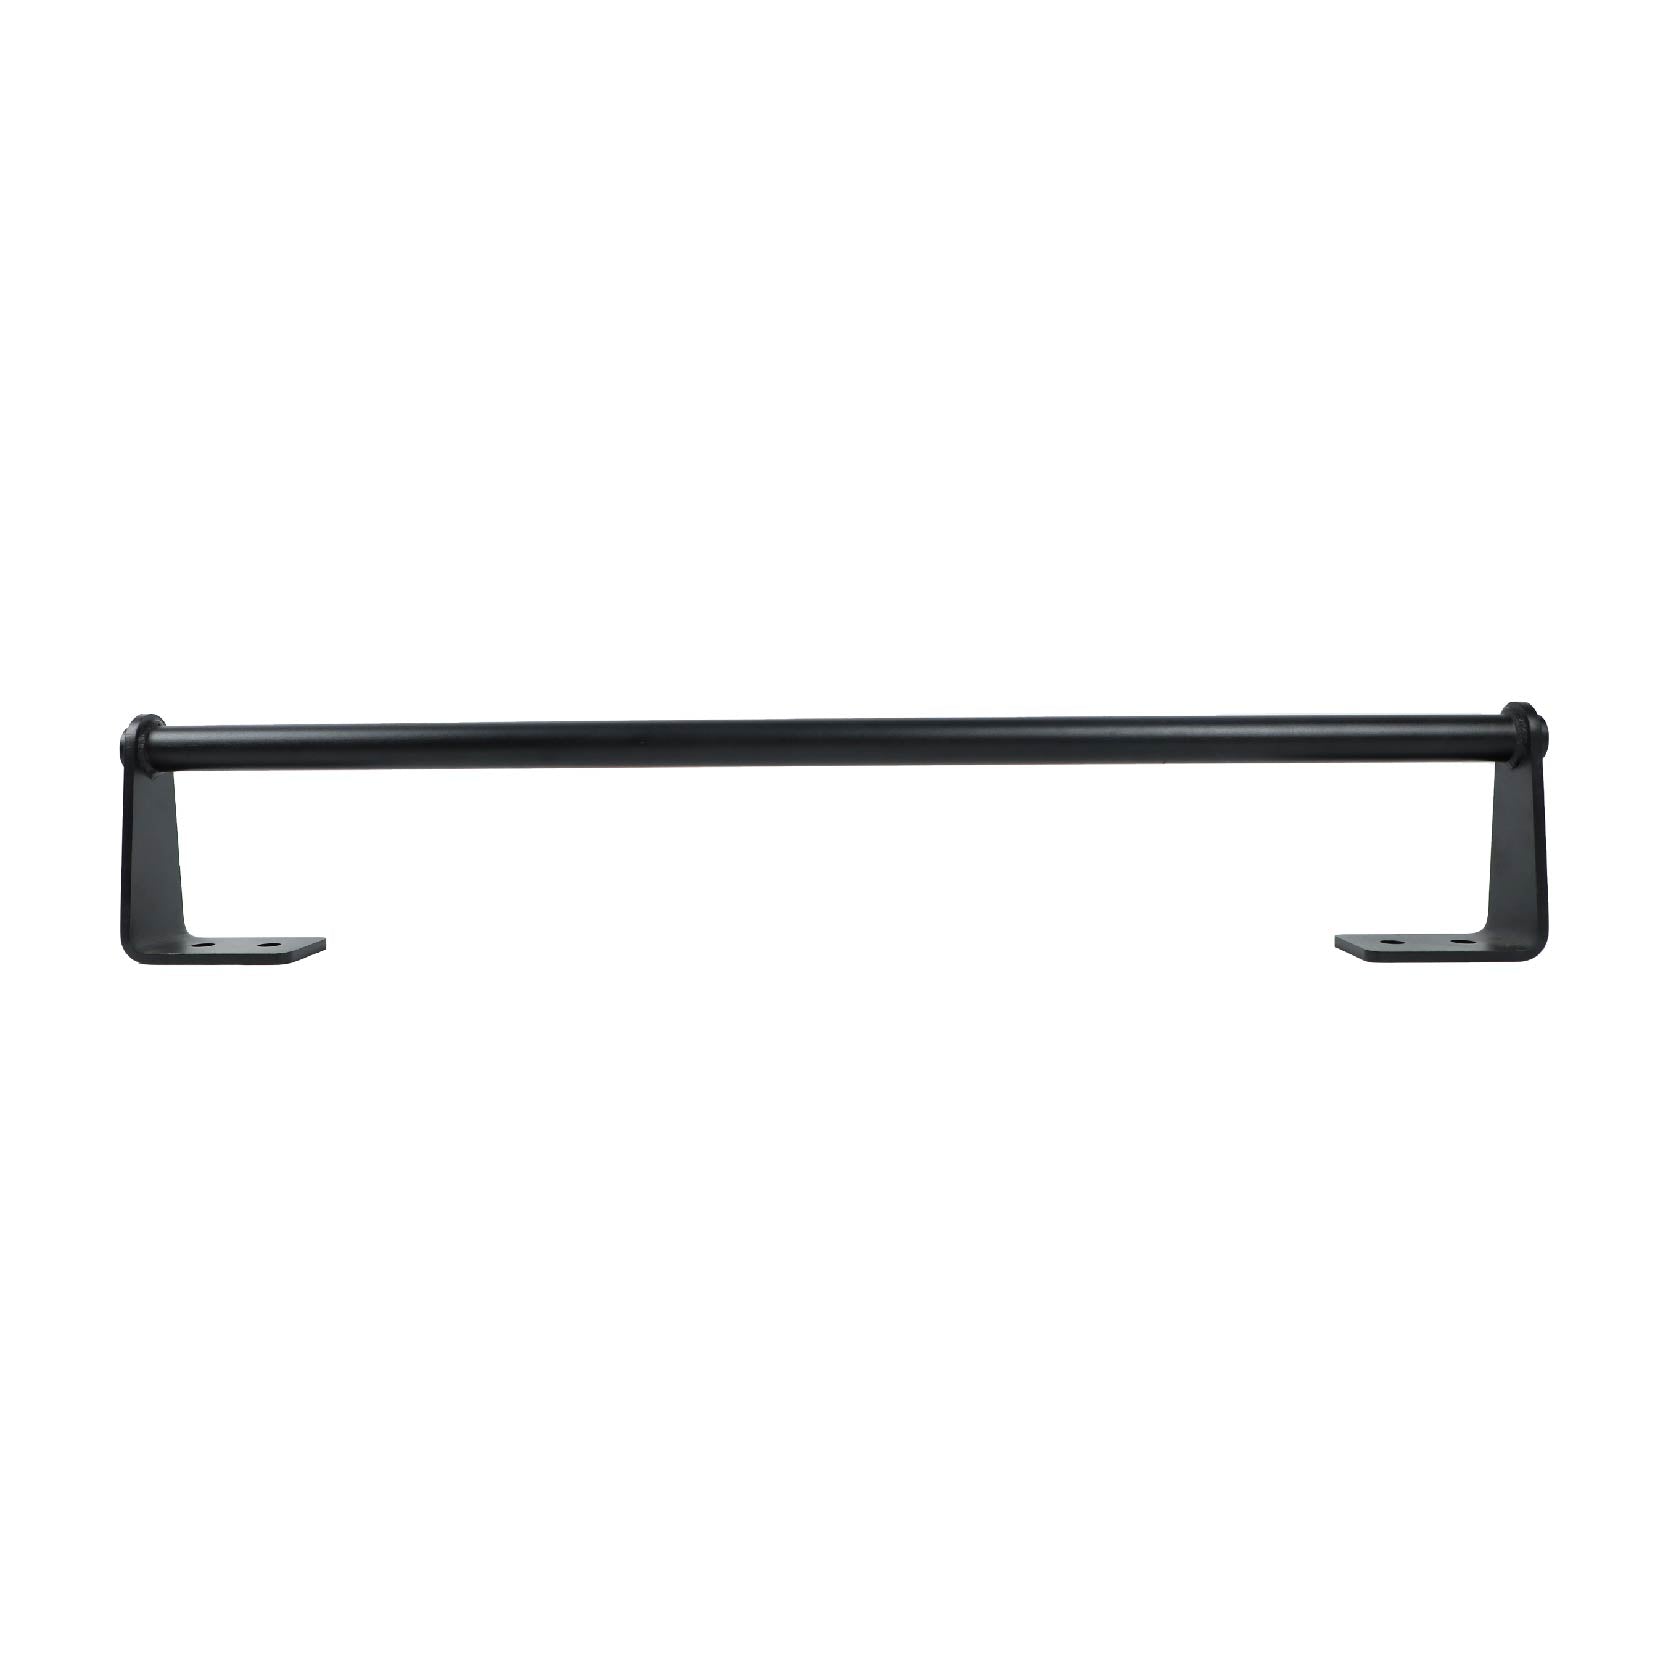 Muscle Up Bar - Bench Fitness Equipment